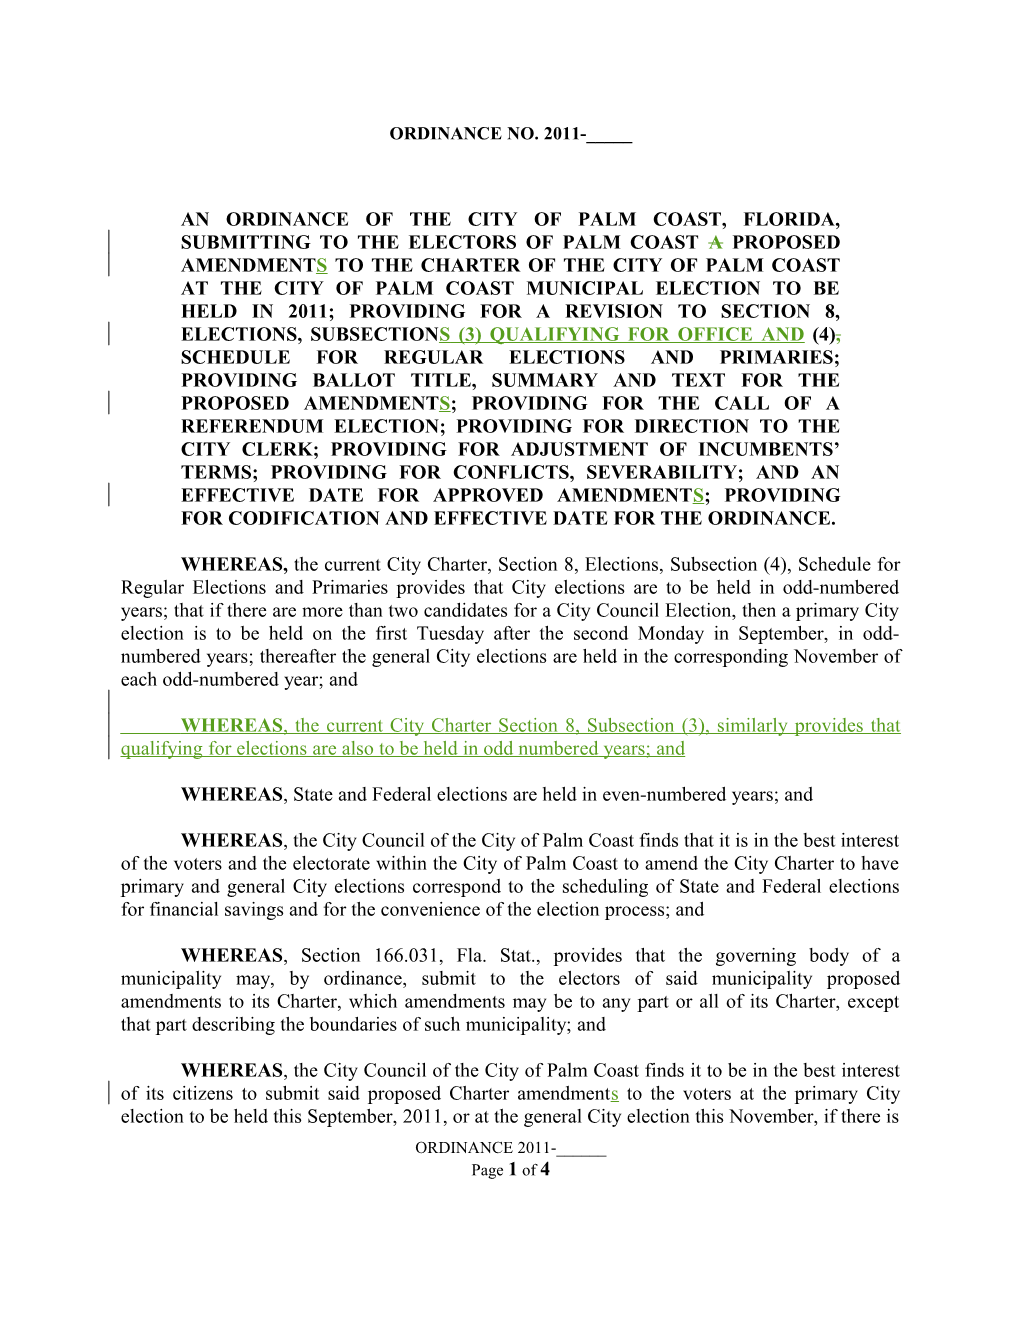 An Ordinance of the City of Palm Coast, Florida, Submitting to the Electors of Palm Coast